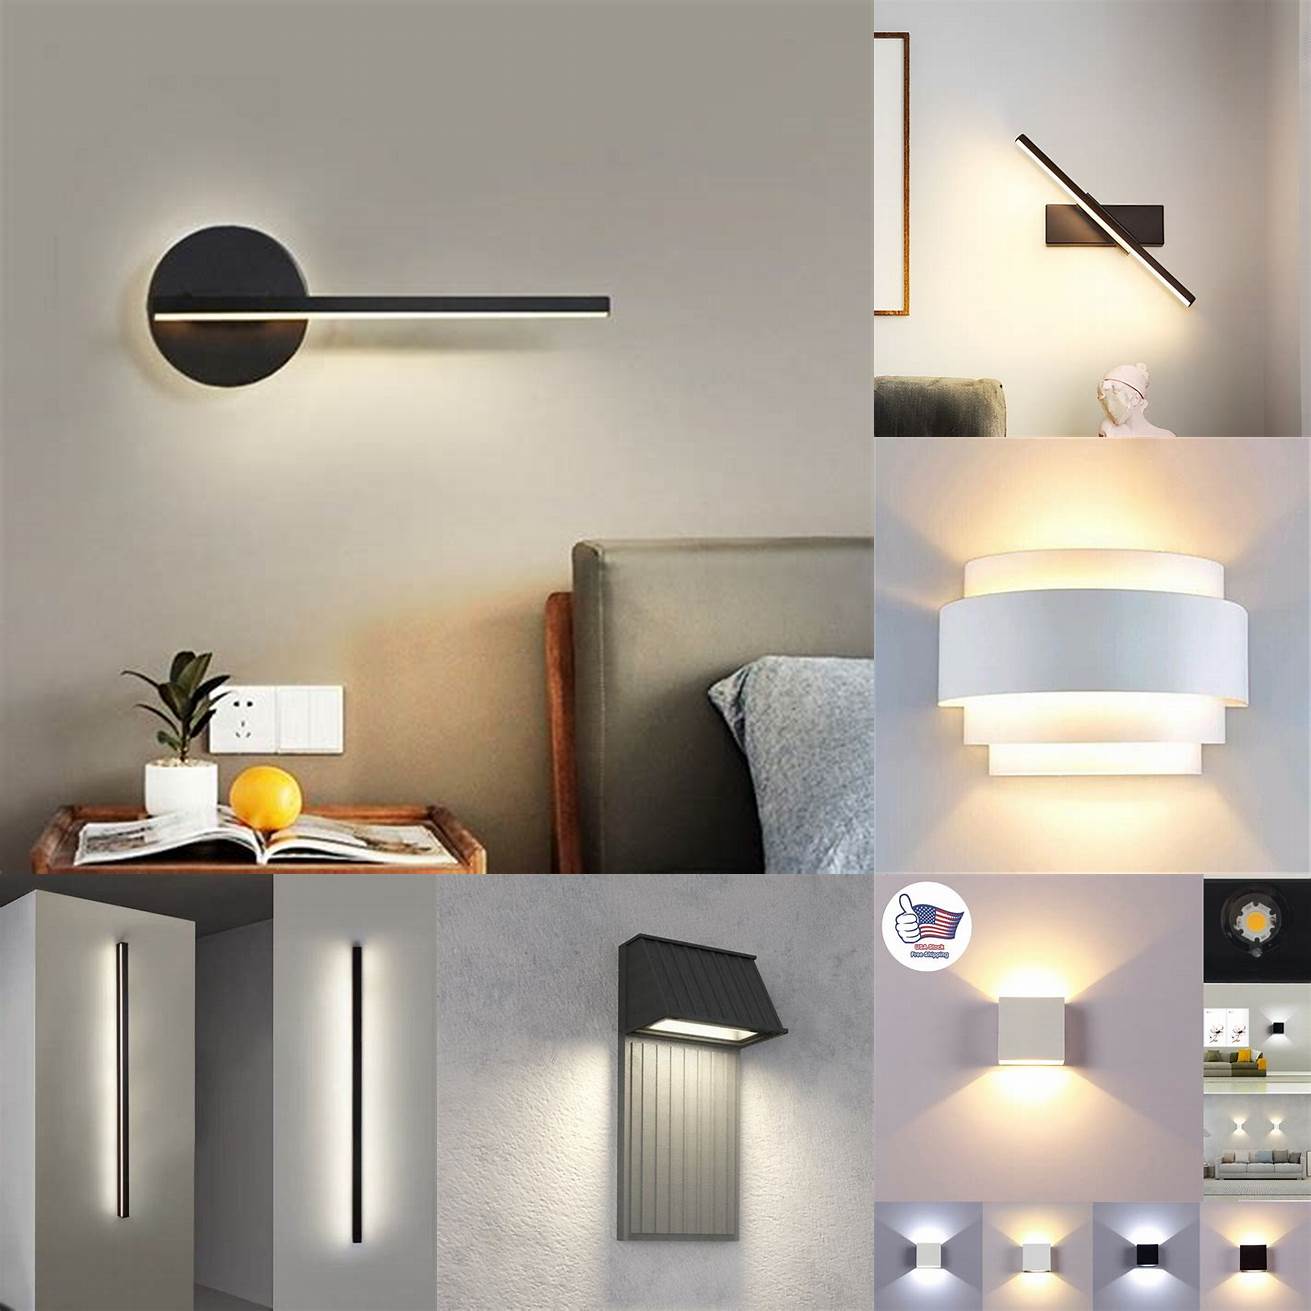 Flush mount wall lights for a minimalist look